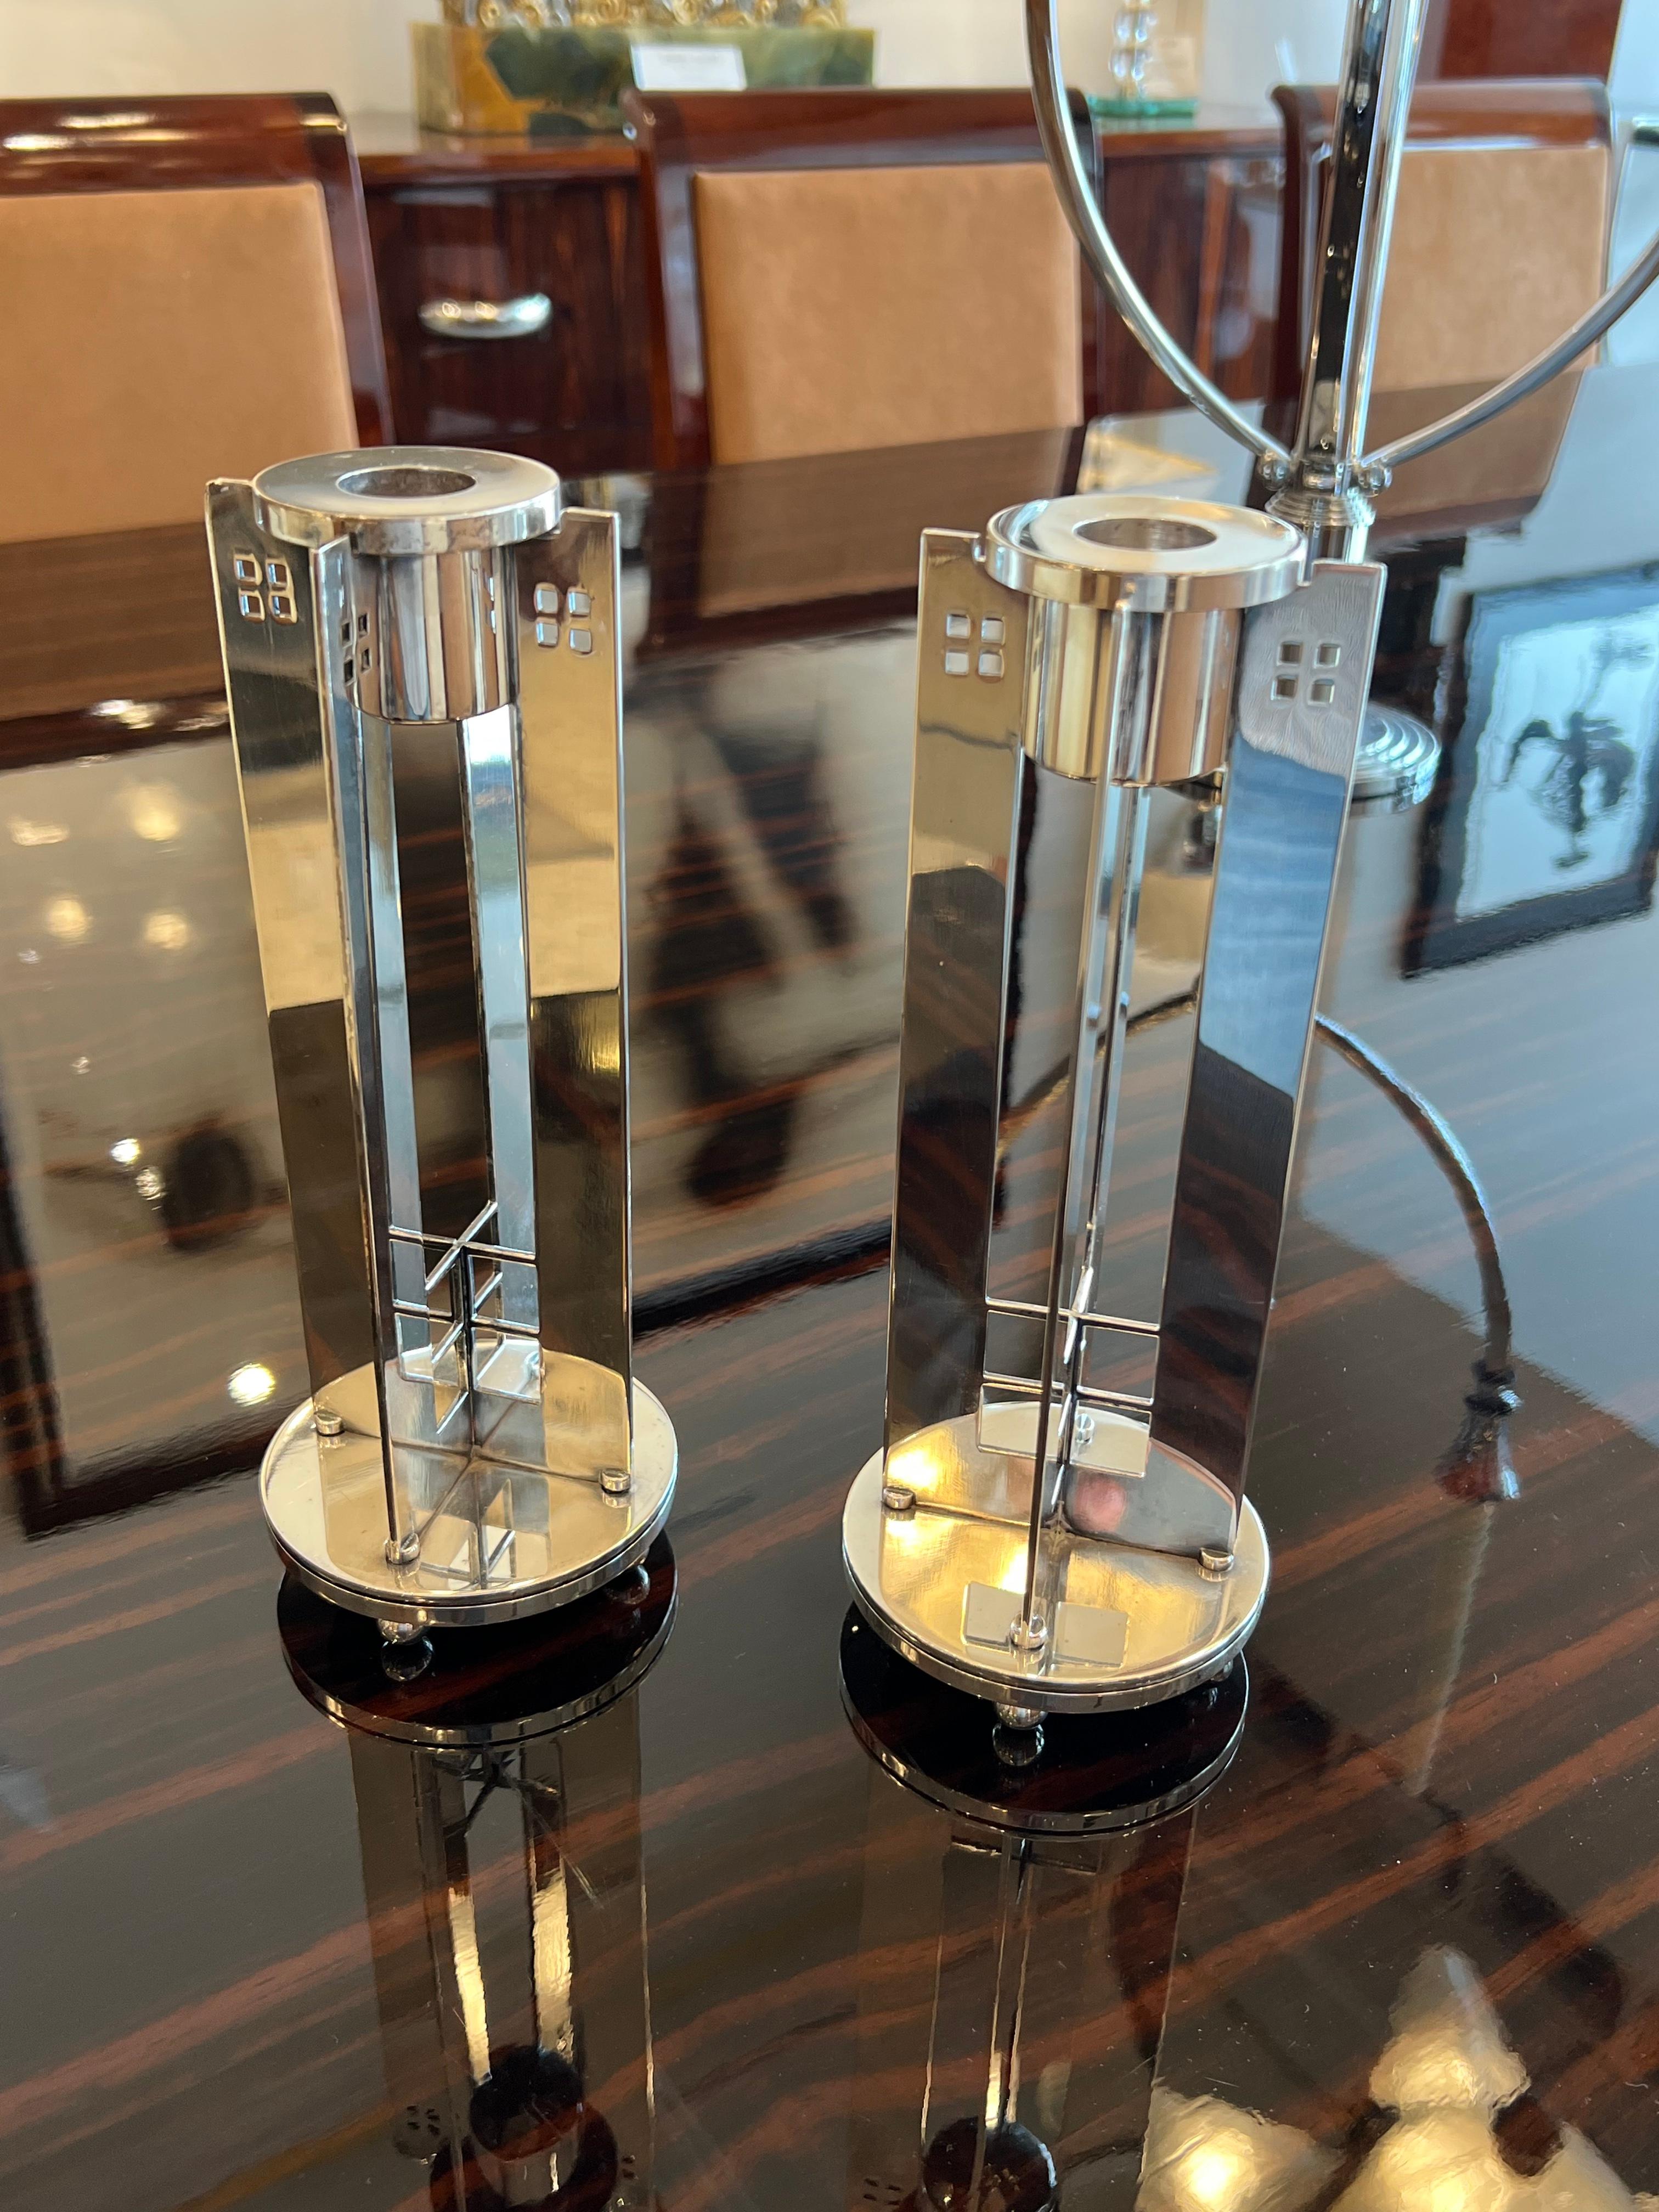 A pair of post modern design Silver Plated candlesticks designed by Richard Meier for Swid Powell.
Made in Italy
Circa: 1984.